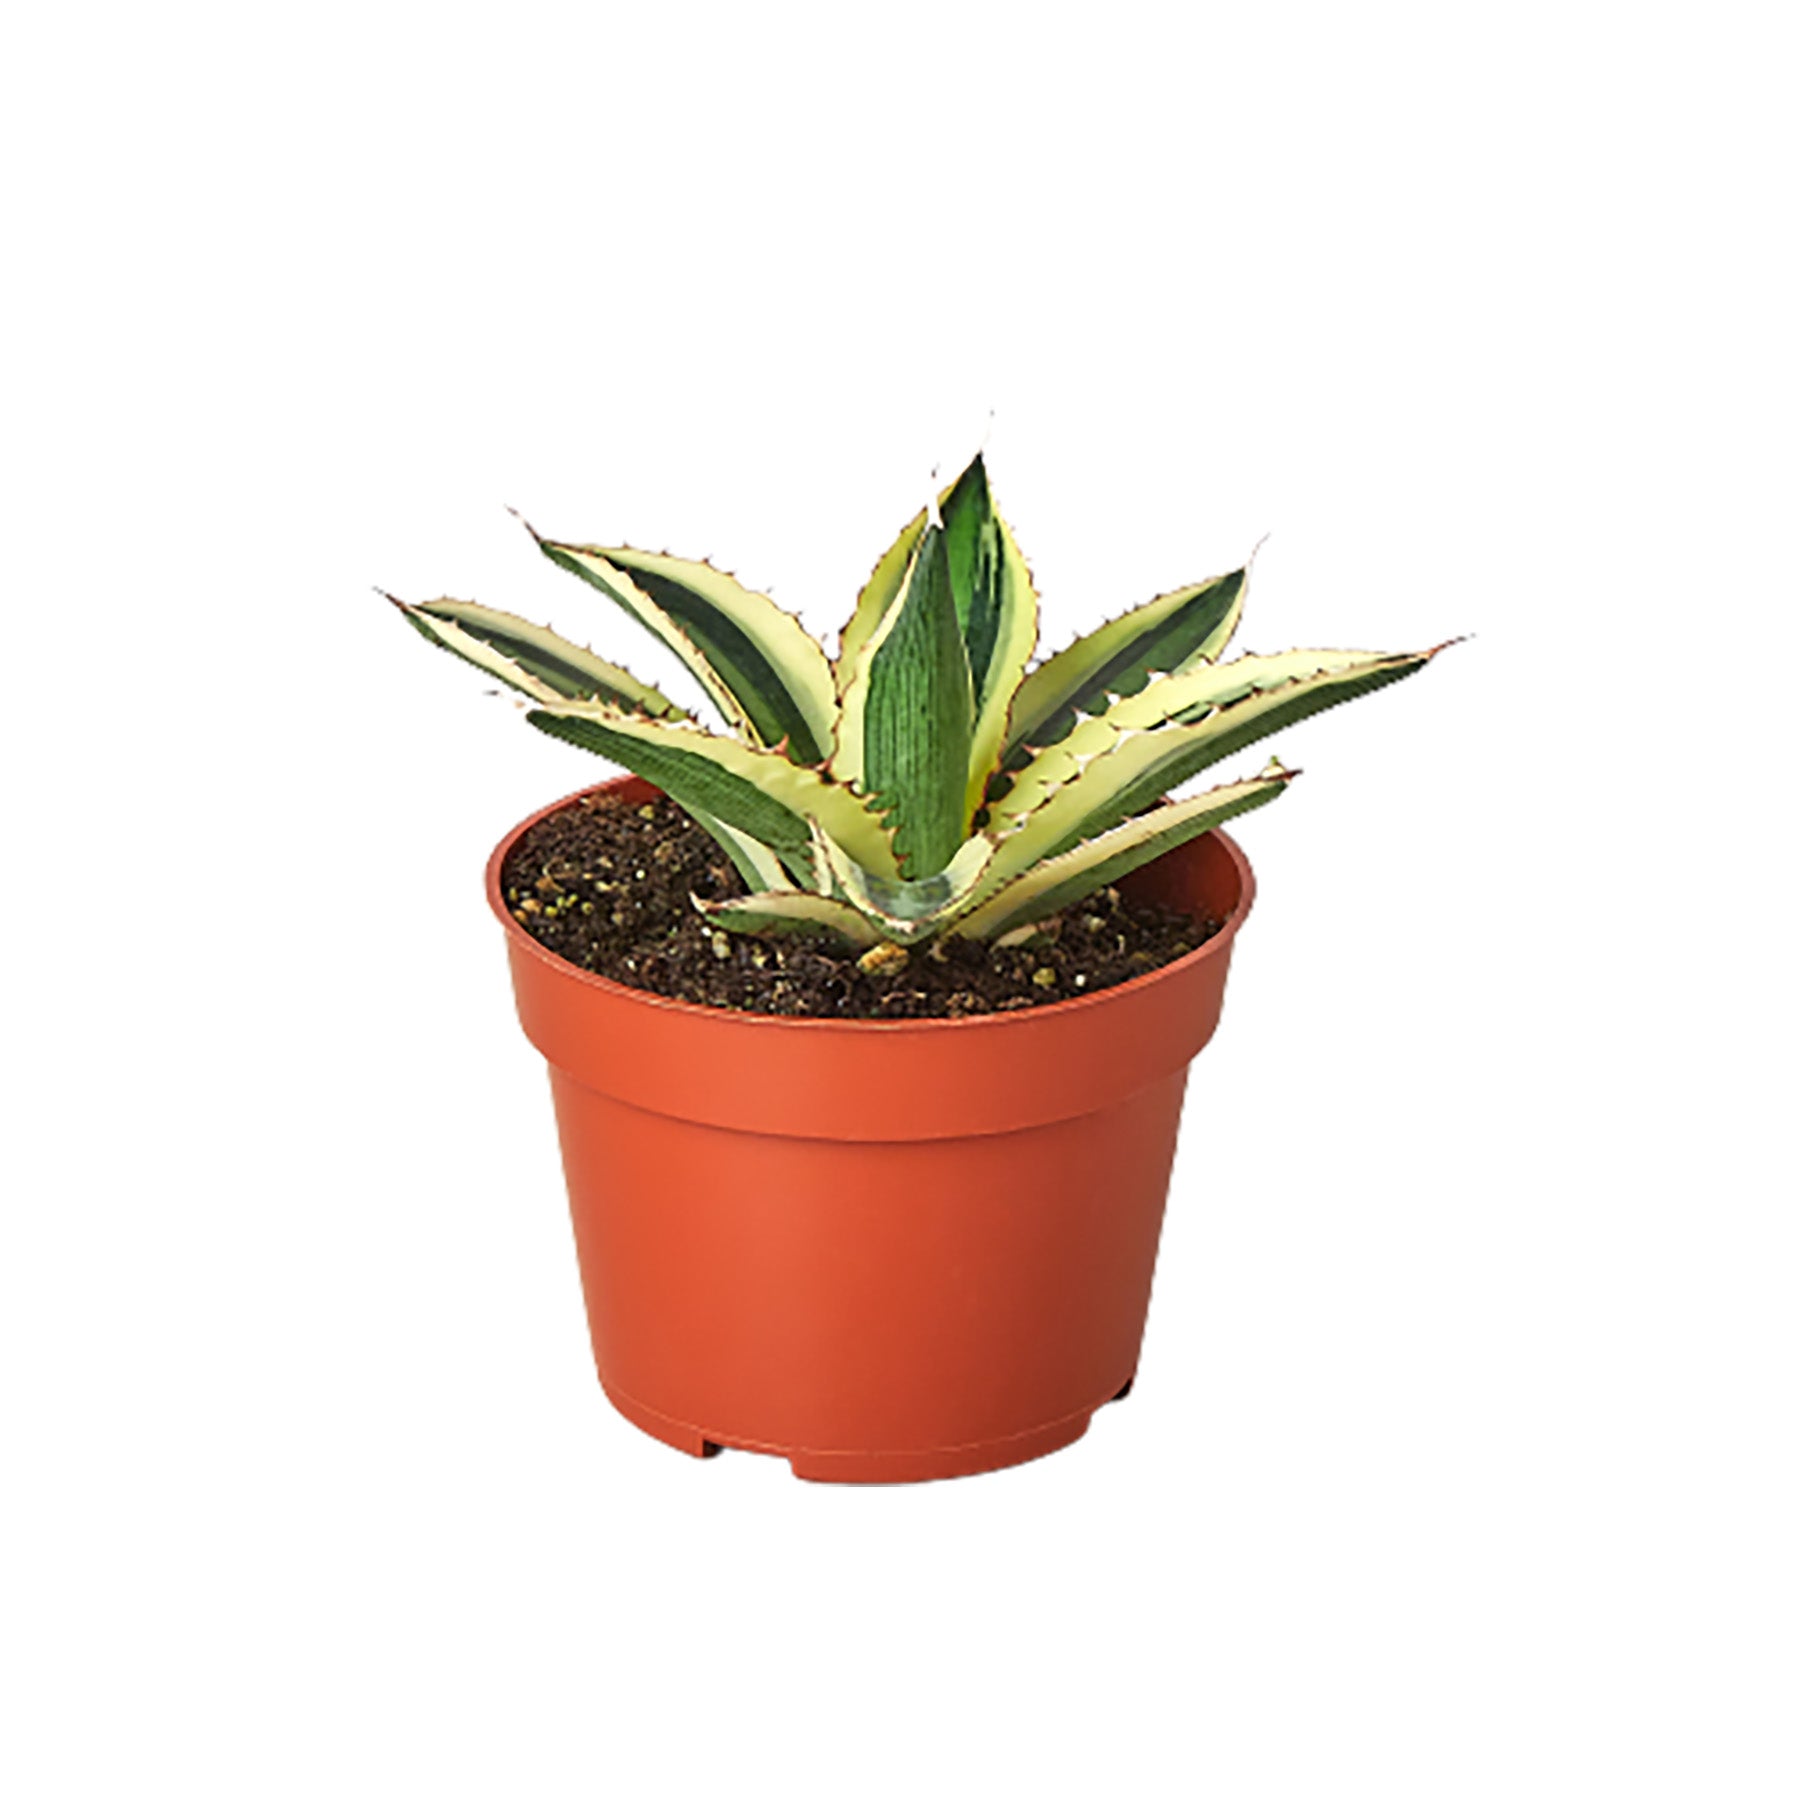 Aloe vera plant in a pot on a white background at the best garden nursery near me.